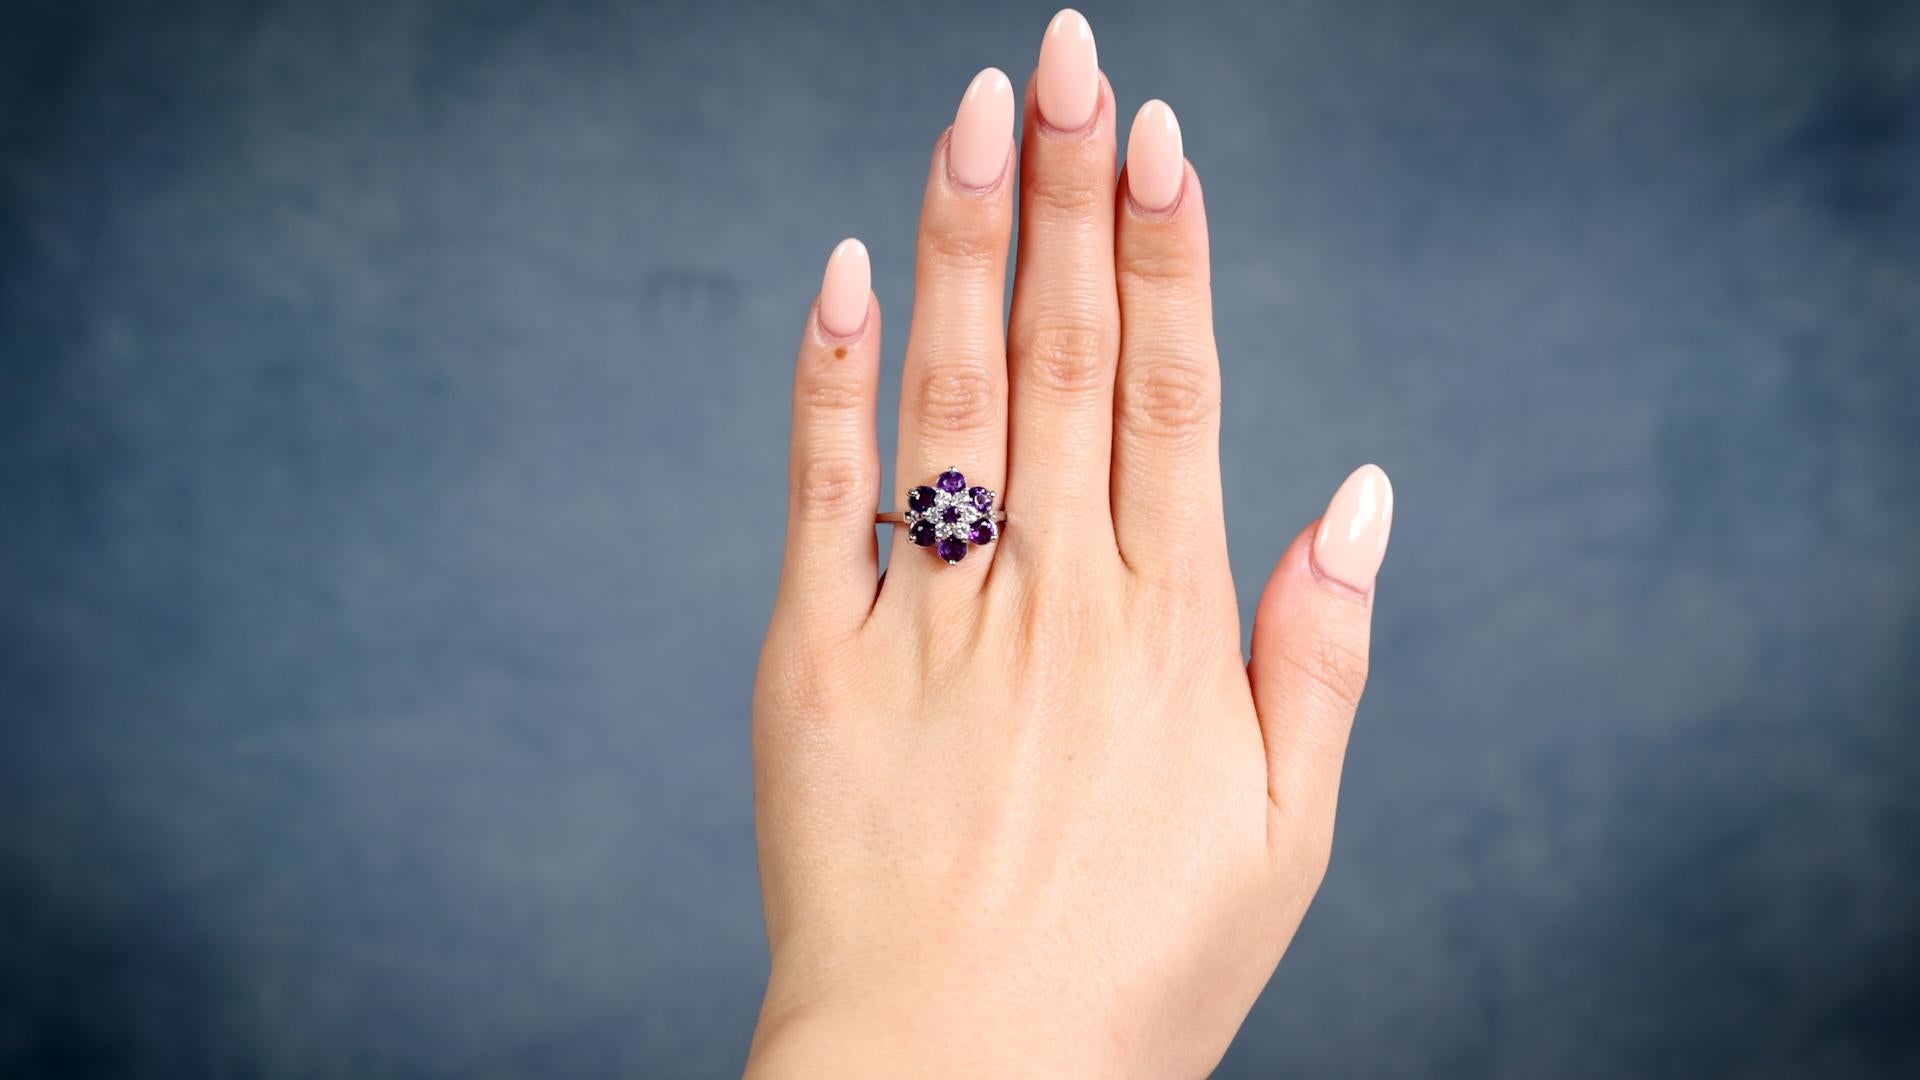 One Vintage Amethyst and Diamond 14k White Gold Flower Ring. Featuring seven round brilliant cut amethysts with a total weight of approximately 1.30 carats. Accented by six round brilliant cut diamonds with a total weight of approximately 0.25